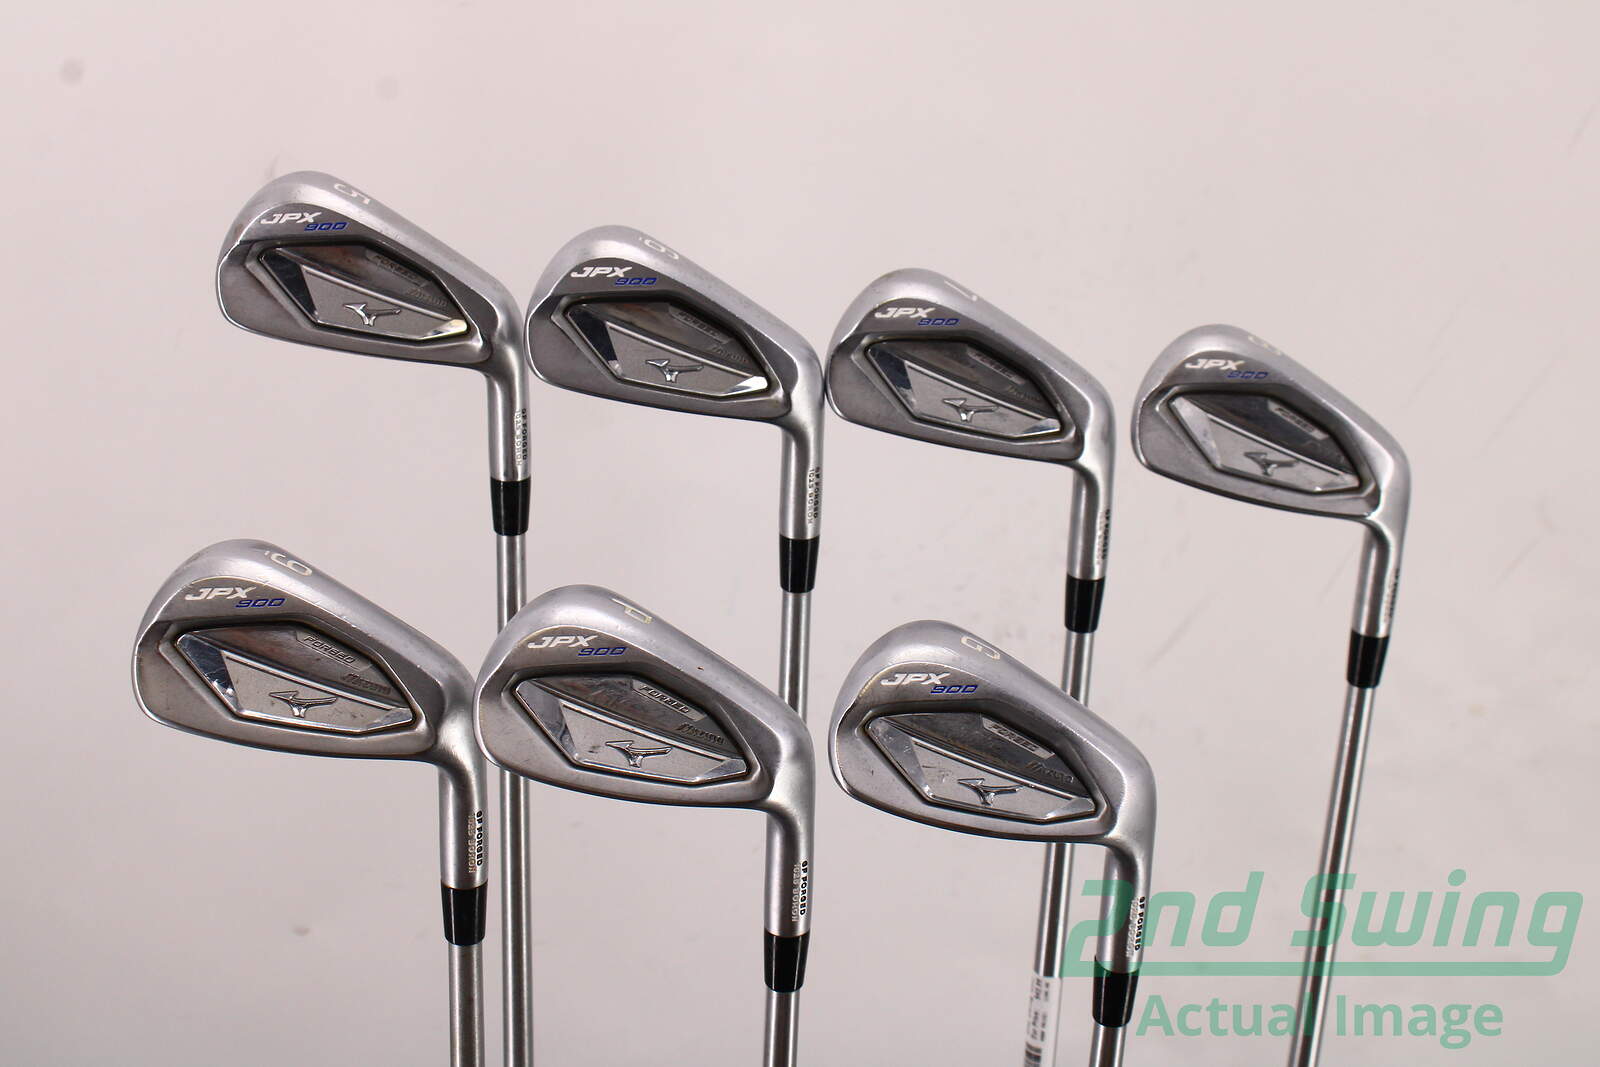 used jpx 900 forged